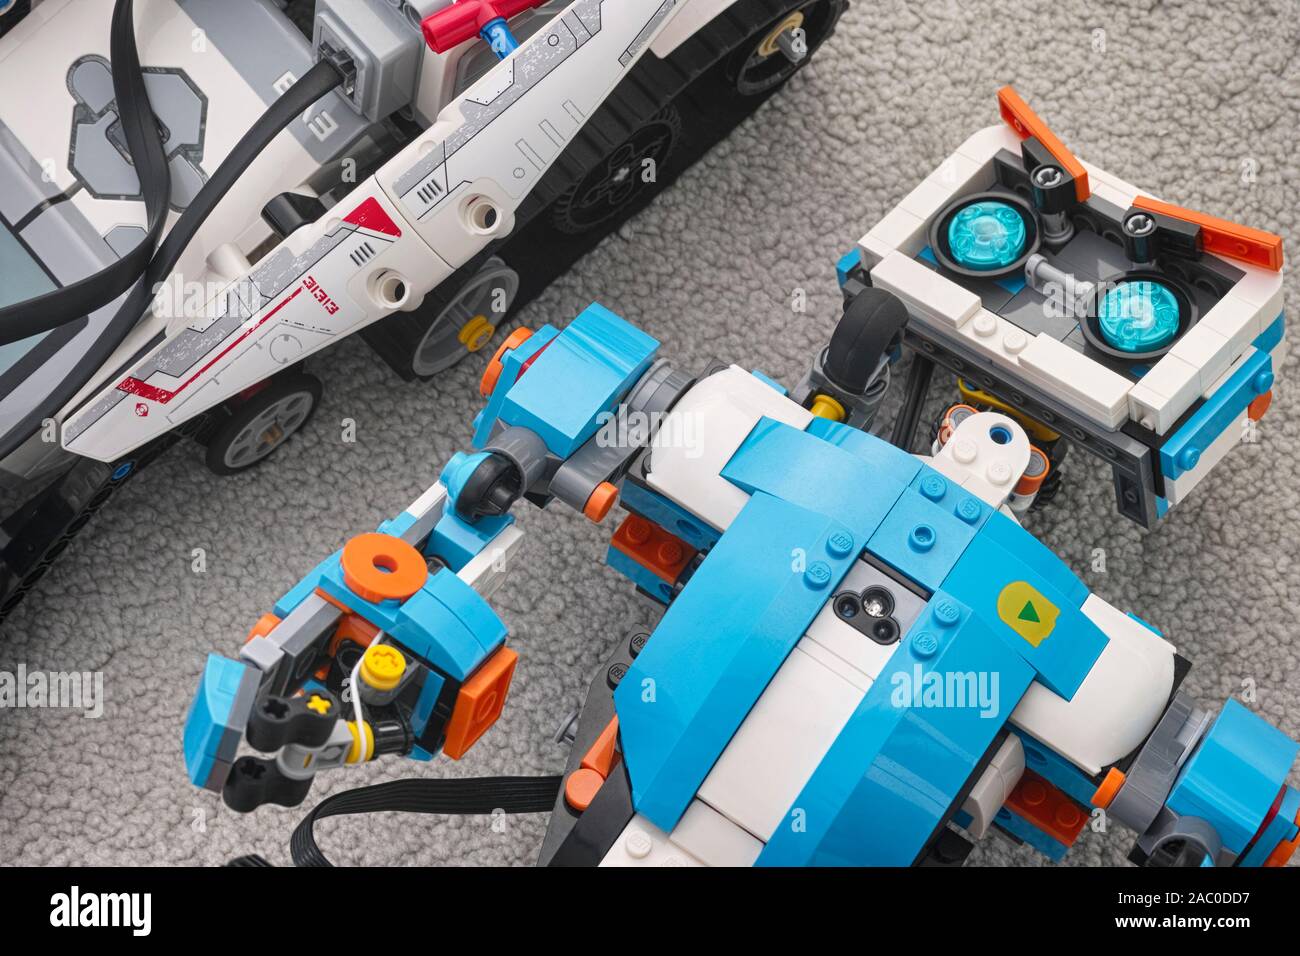 Tambov, Russian Federation - November 20, 2019 Lego Boost Vernie the Robot and Mindstorms EV3 Robot. Close up. Stock Photo